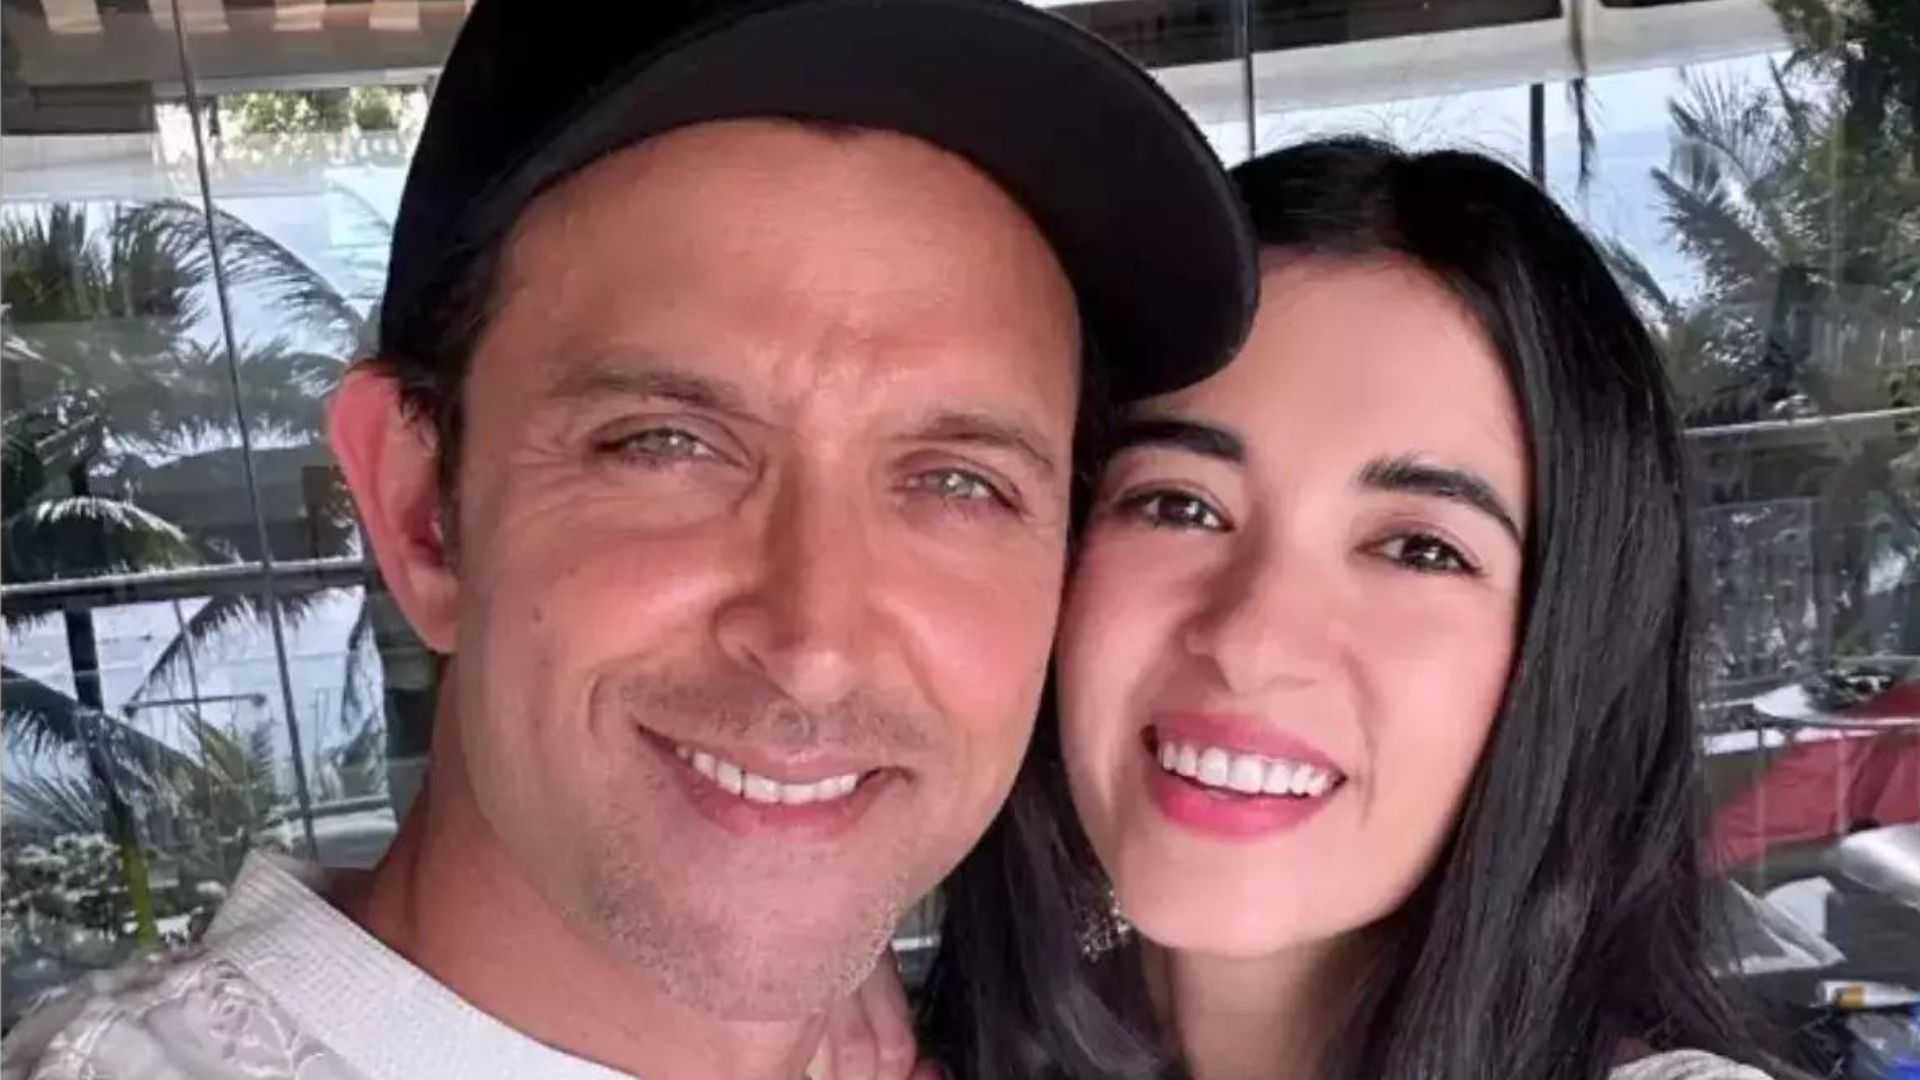 Hrithik Roshan rubbishes reports of girlfriend Saba Azad moving in with him, says 'no truth to this'